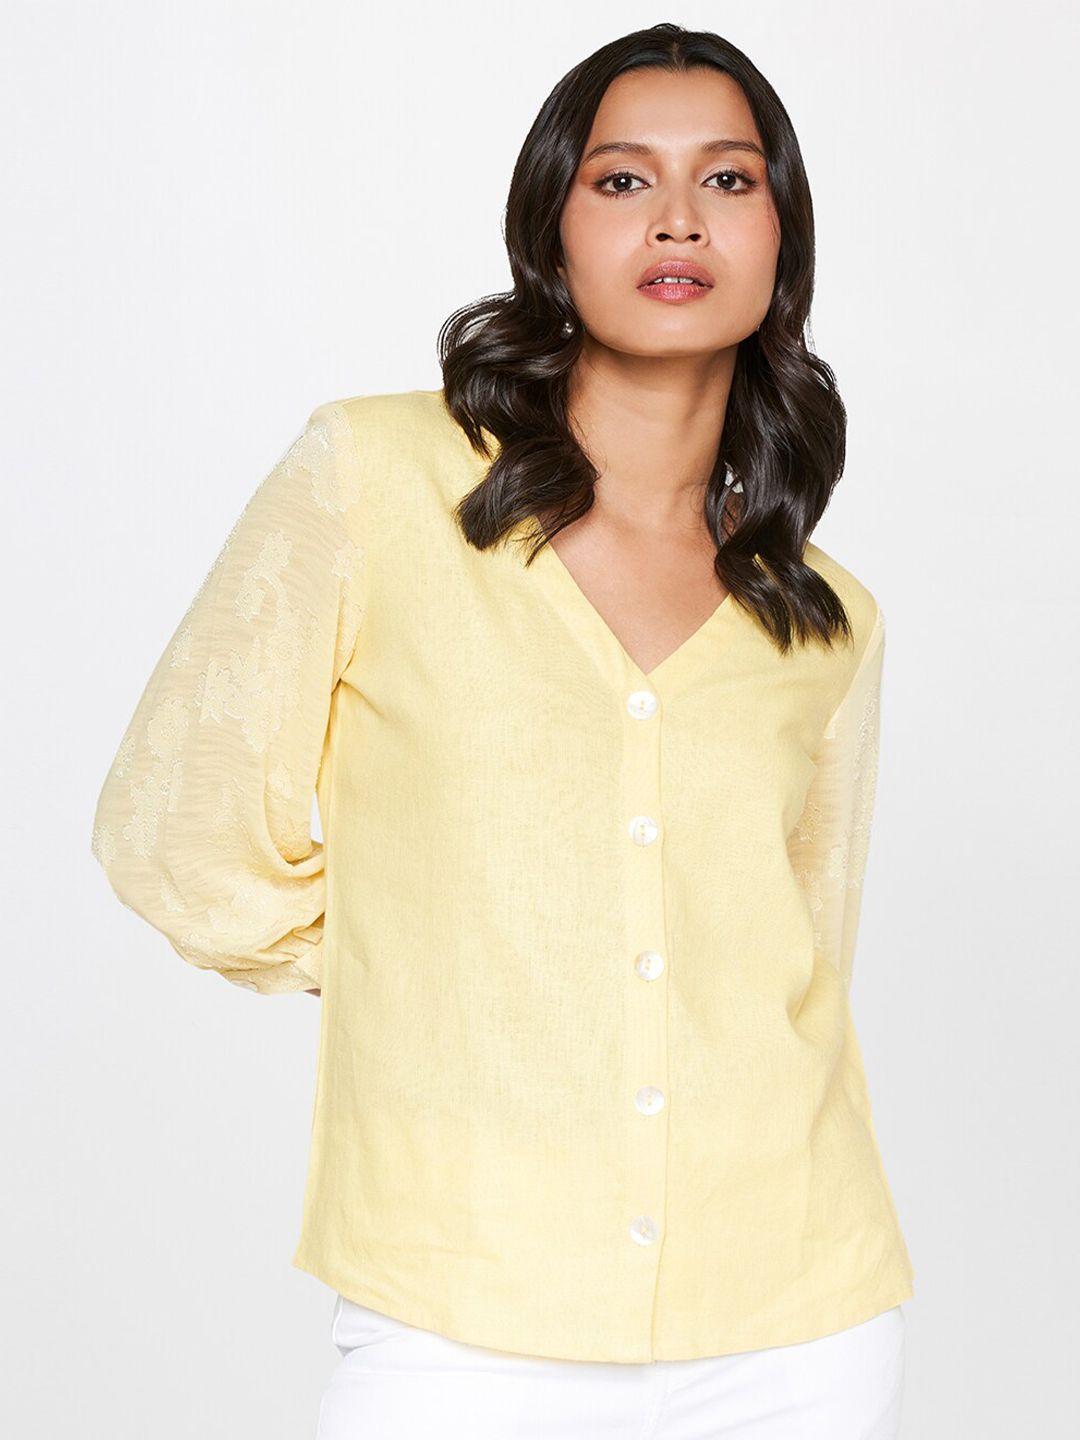 and-v-neck-puff-sleeves-shirt-style-top